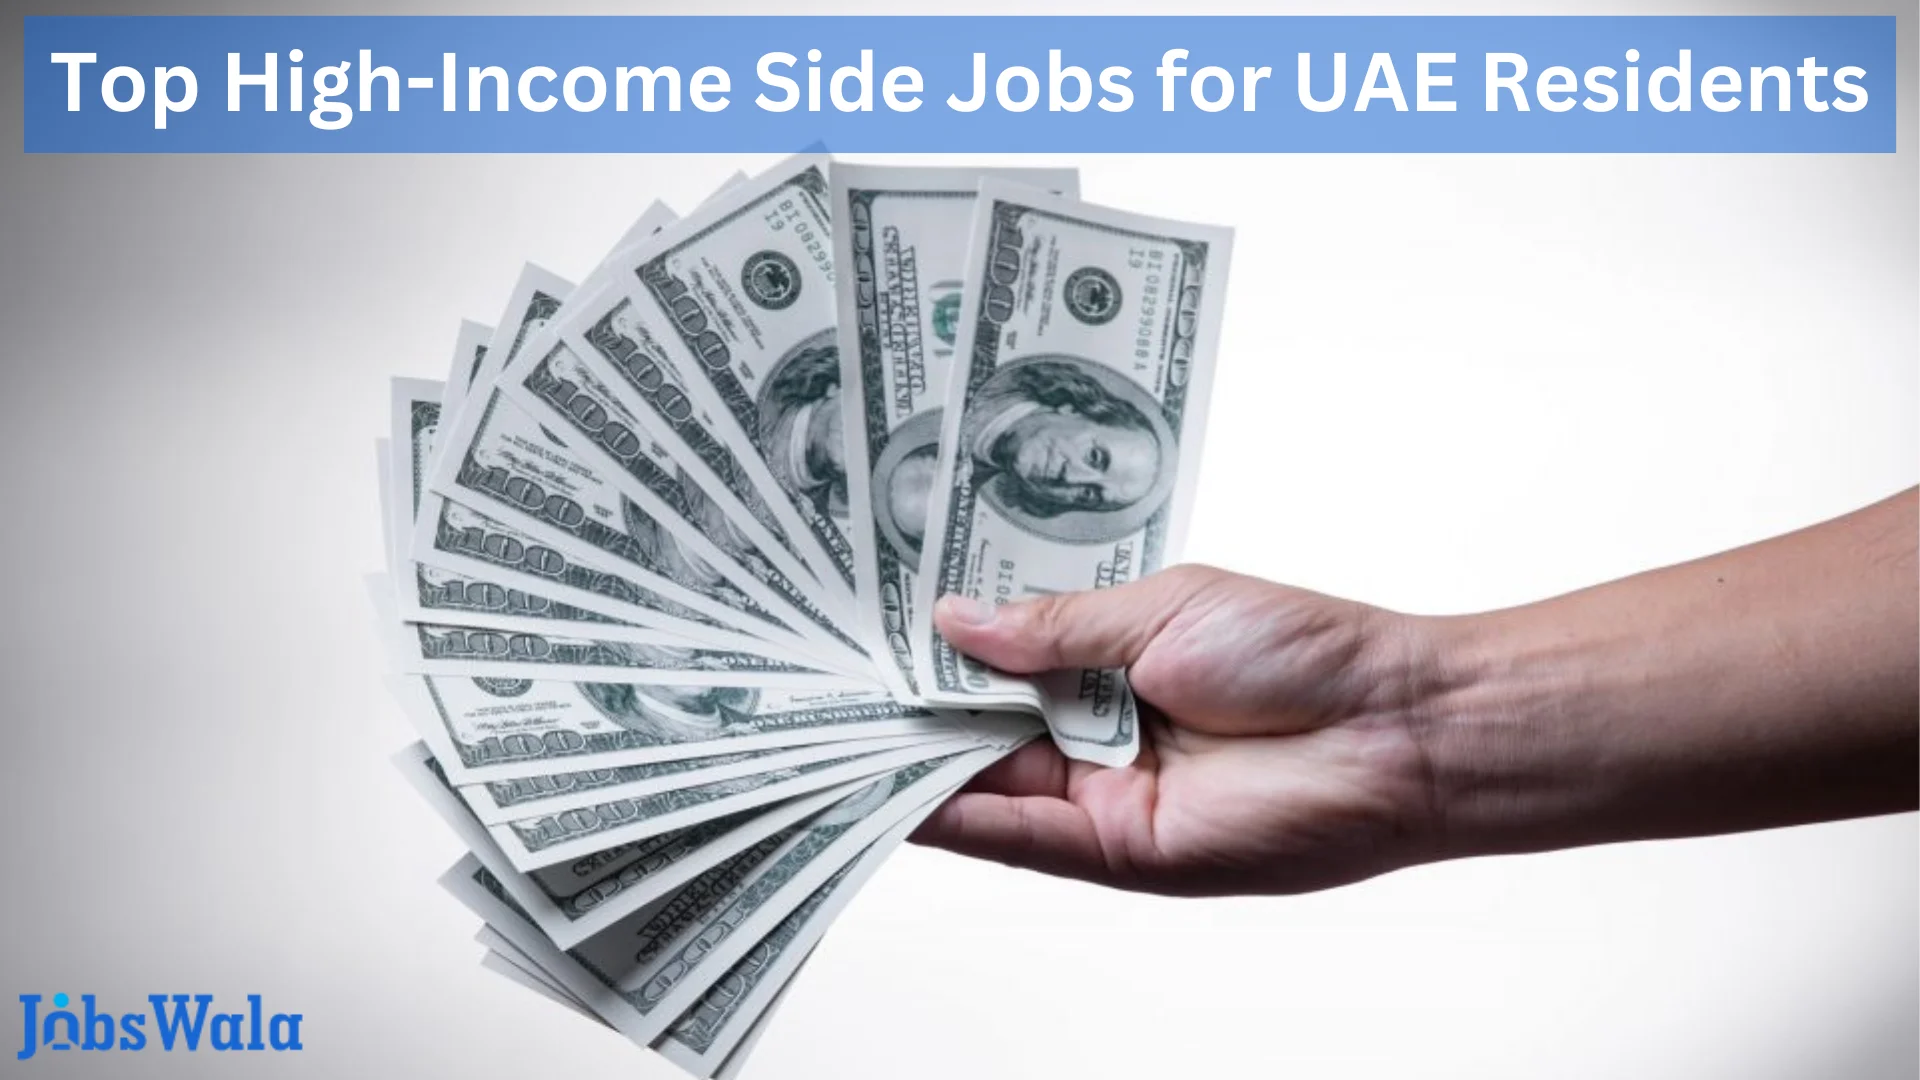 Top High-Income Side Jobs for UAE Residents